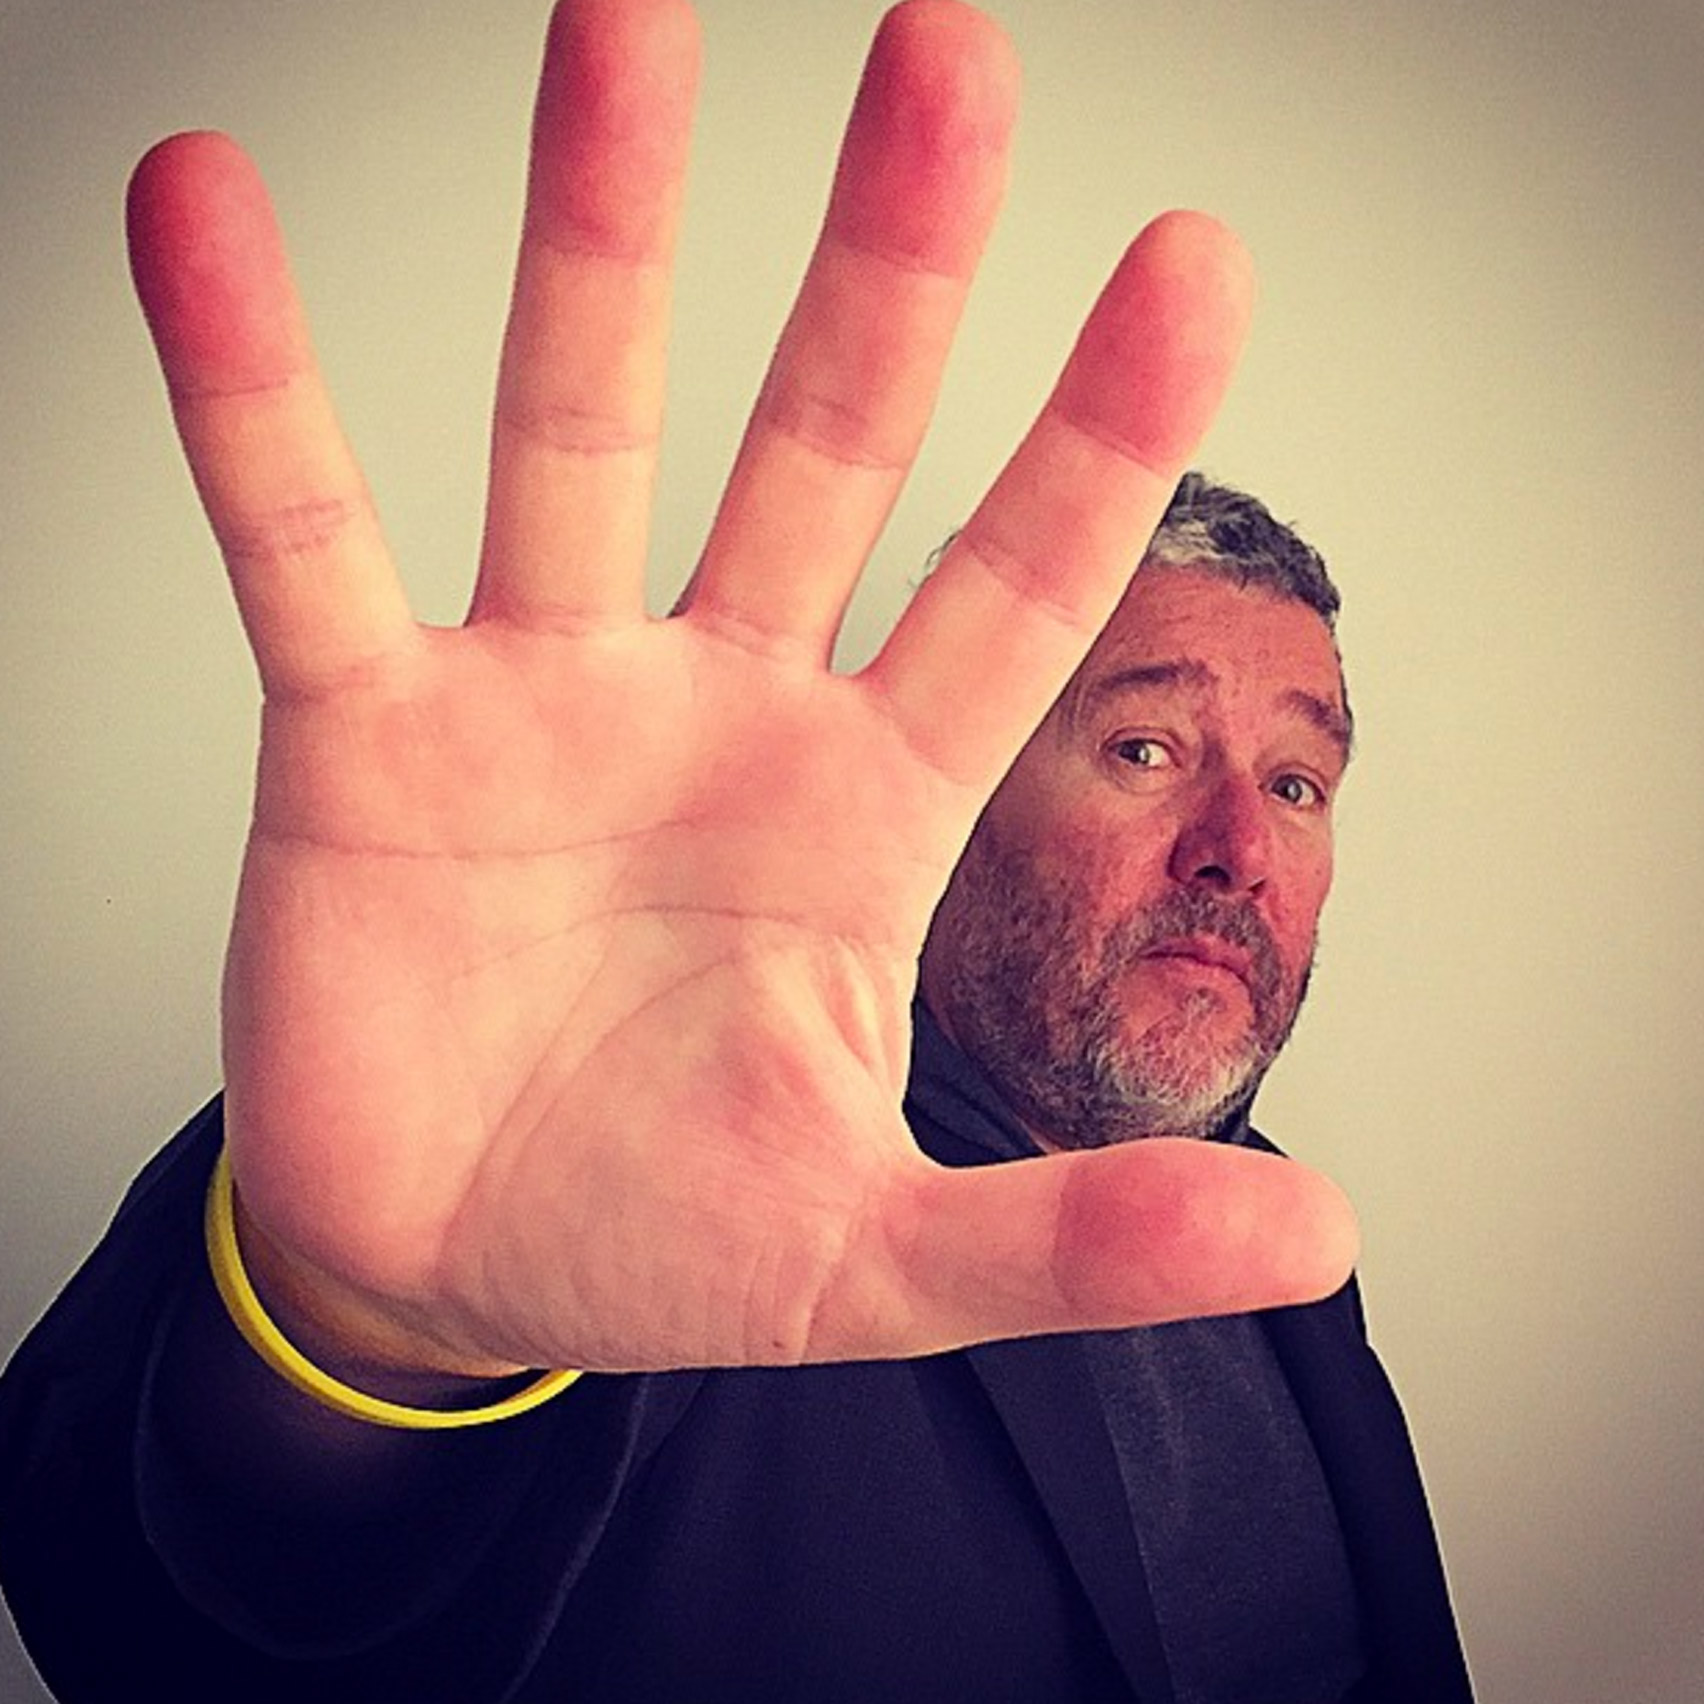 Philippe Starck joins Instagram and Facebook